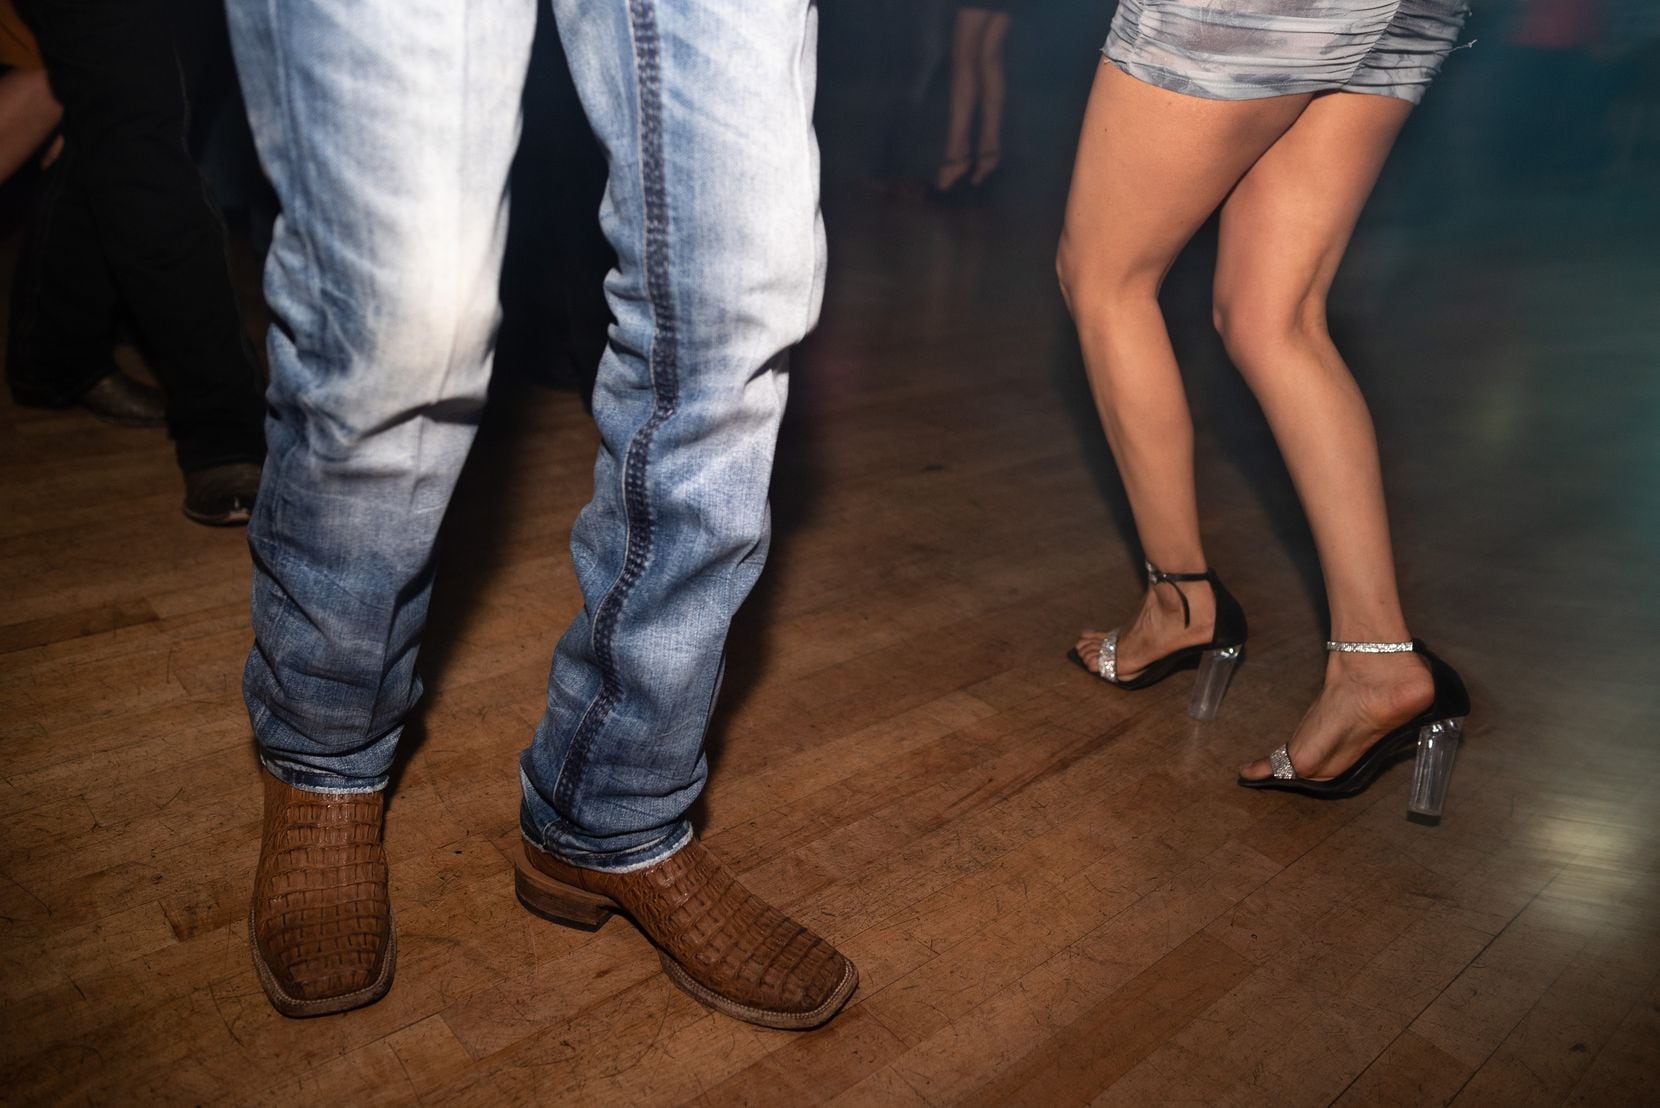 A man in square-toed boots dances at the West Dallas Rodeo on Saturday night, January 7th...